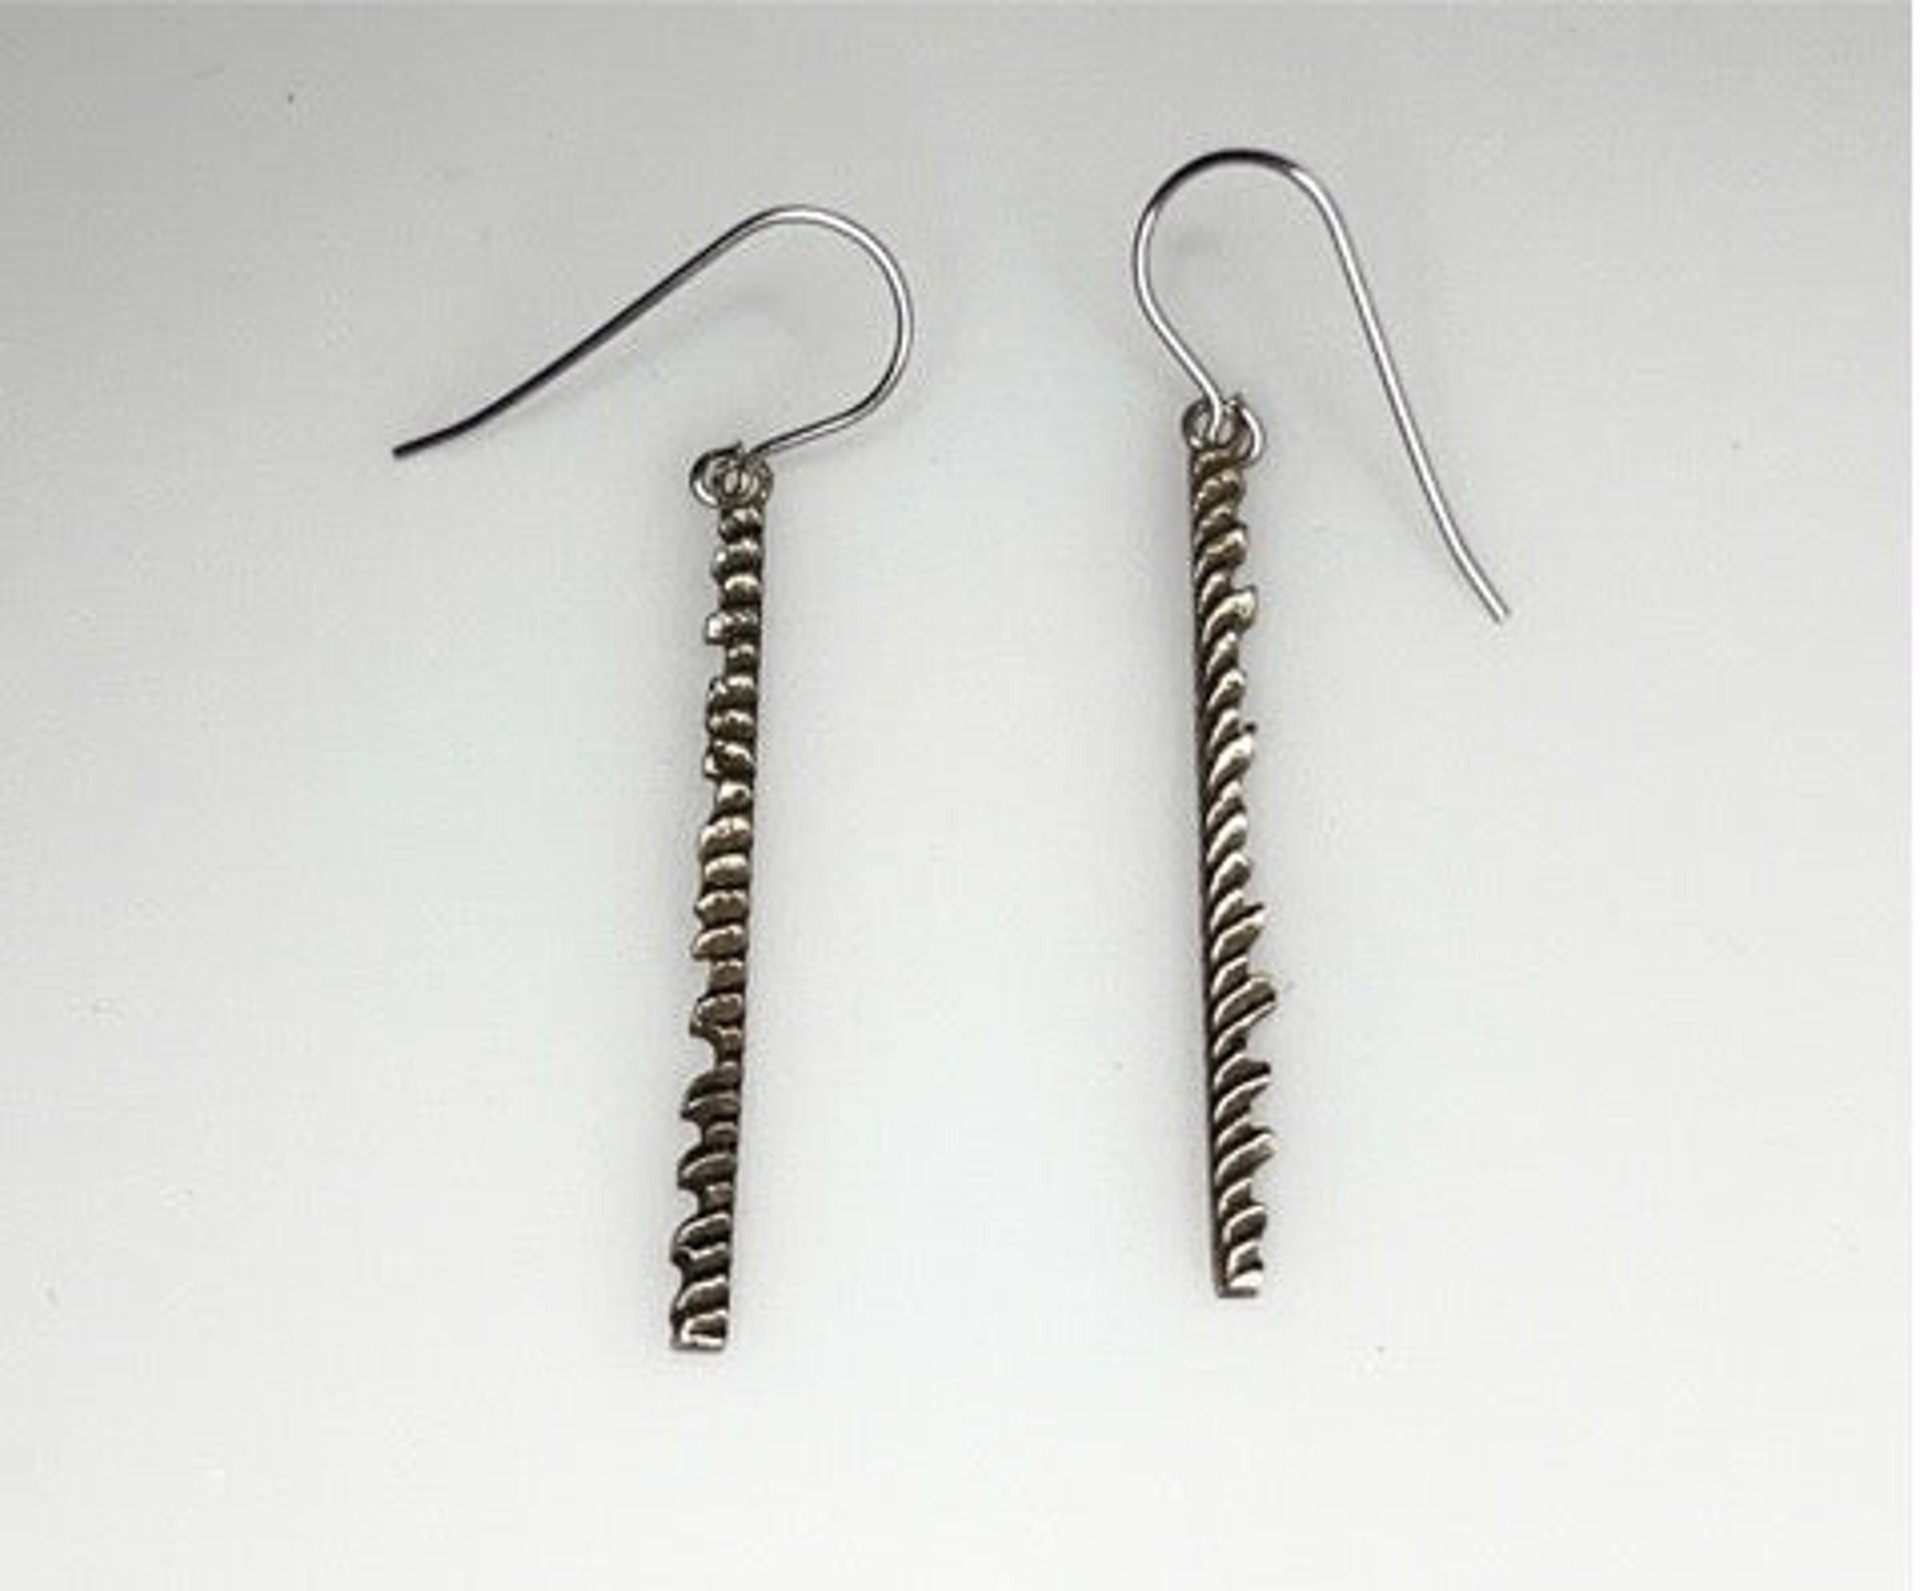 CTT Cuttlefish Earrings 1 by Christopher Taylor Timberlake